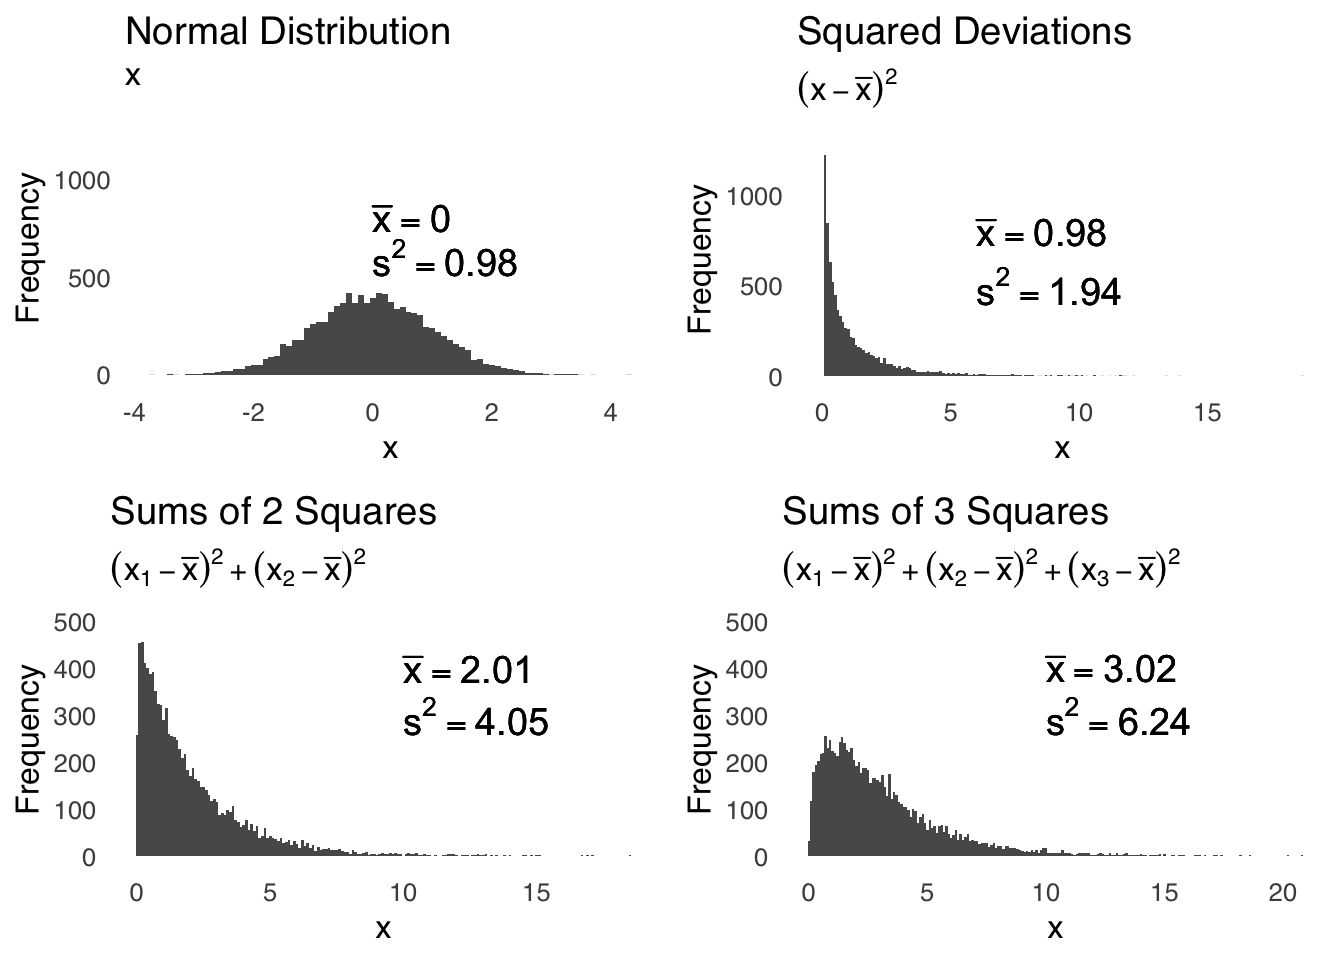 A Standard Normal Distribution and its Squared Deviations